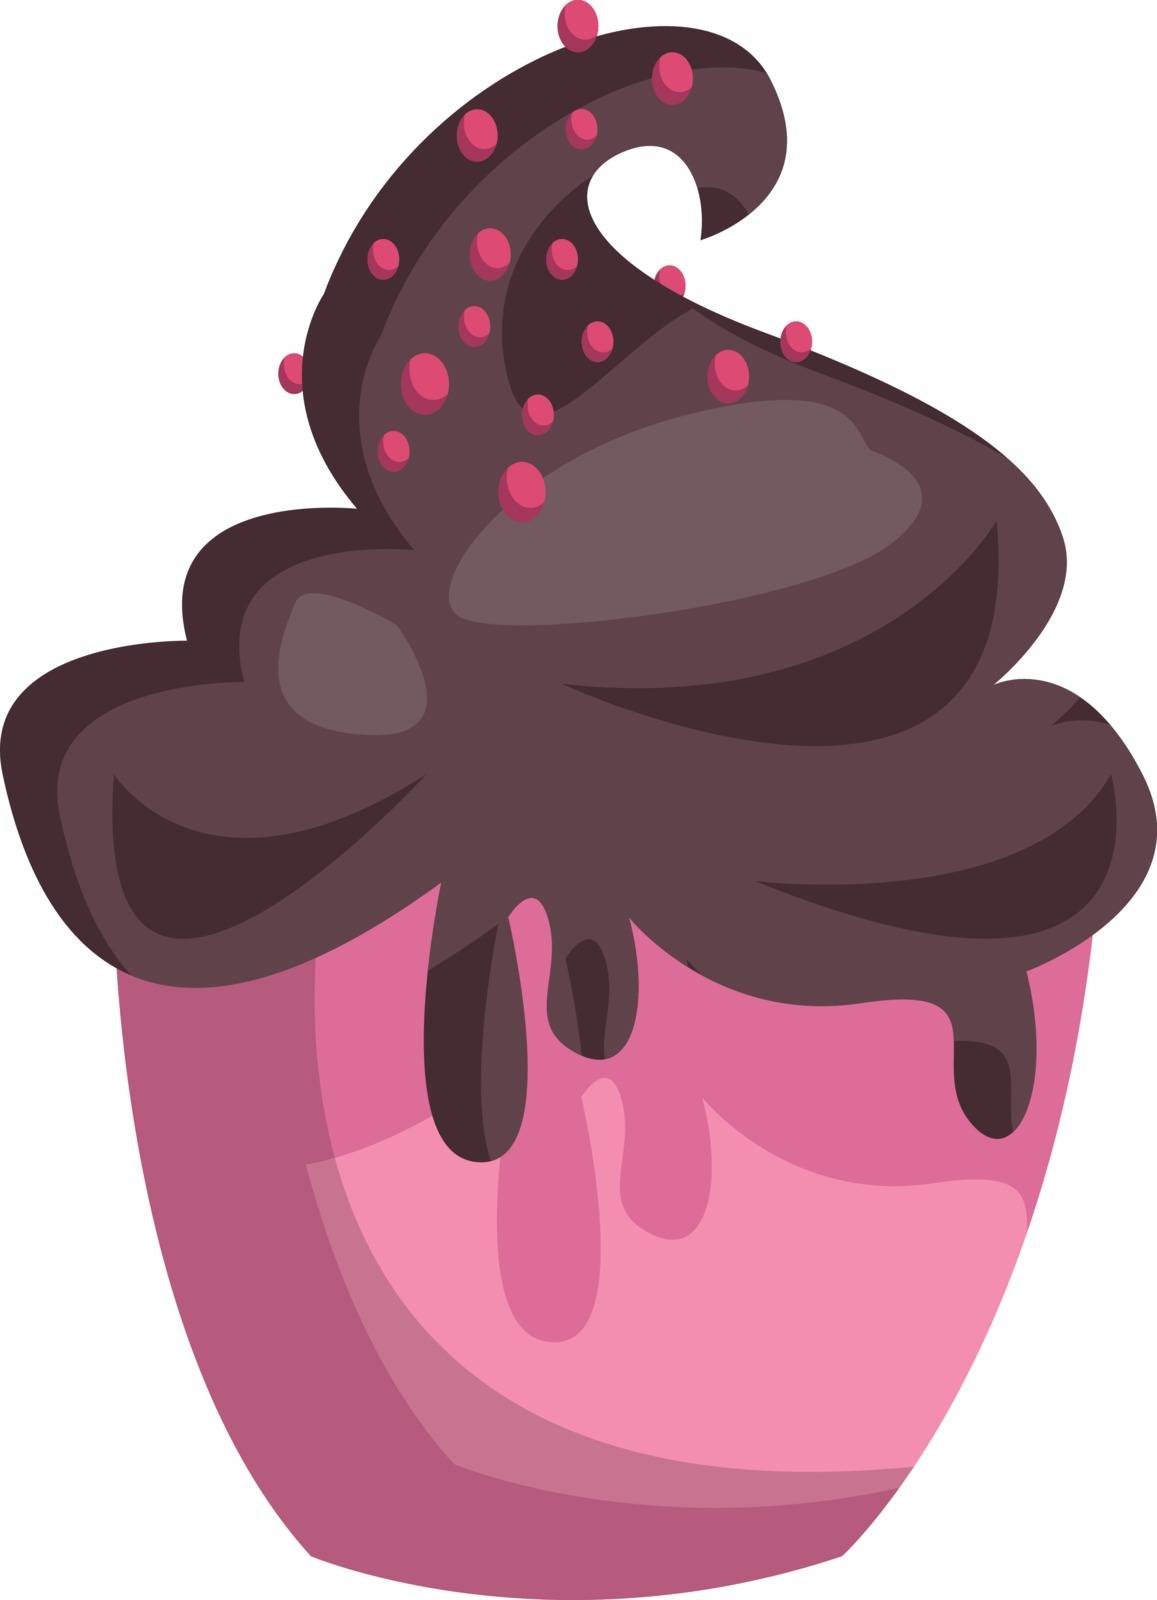 Pink icecream cup with choclate icecream and pink sprinkles on t by Morphart